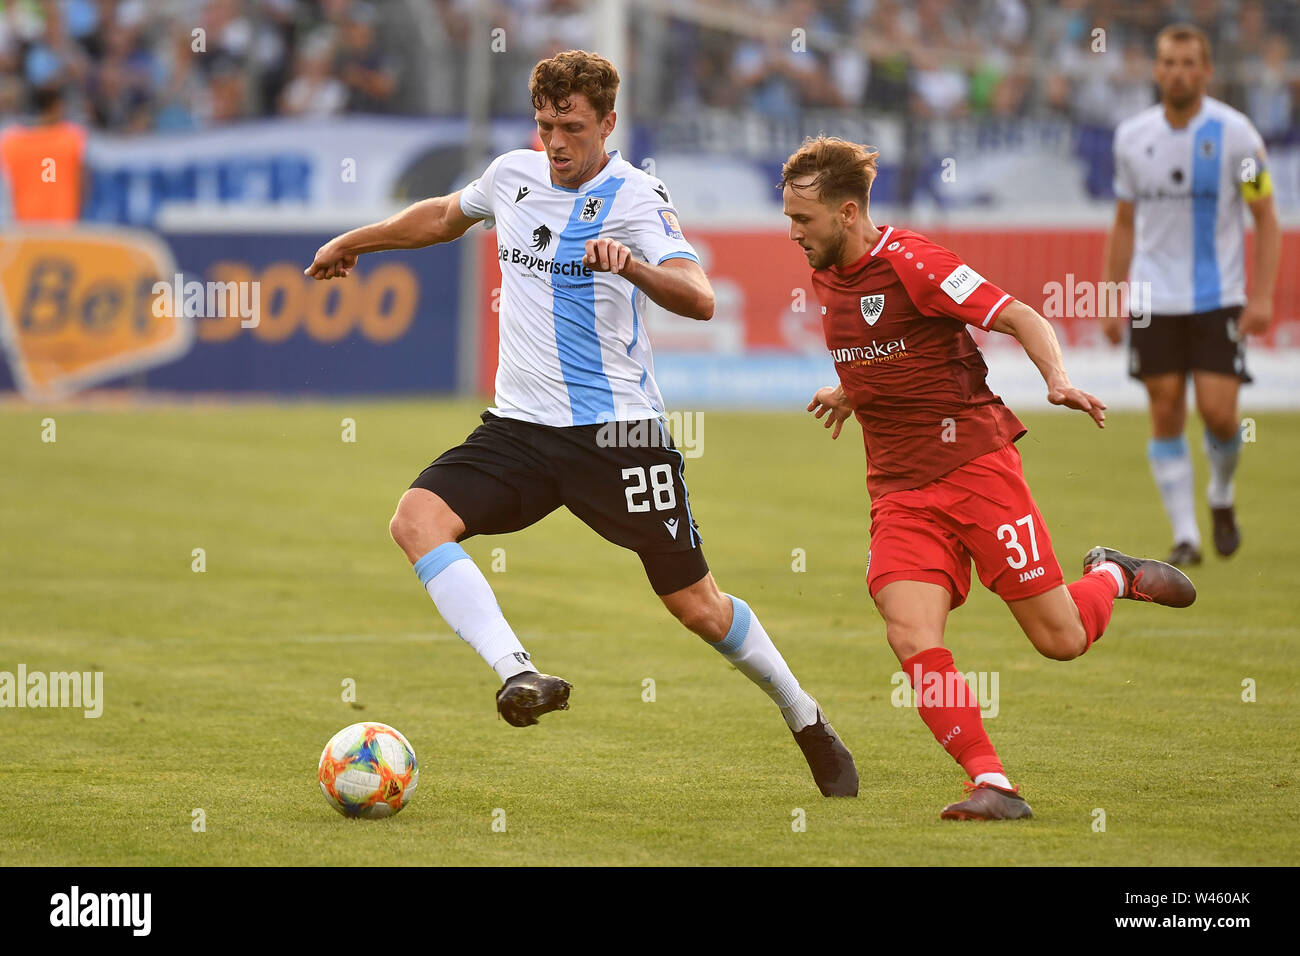 Munich, Deutschland. 19th July, 2019. Herbert PAUL (TSV Munich 1860), action, duels versus Lucas CUETO (MS). Soccer 3. Liga, 1. matchday, TSV Munich 1860-Prussia Muenster 1-1, on 19.07.2019 Stadium at Gruenwalder Strasse in Munich, DFL REGULATIONS PROHIBIT ANY USE OF PHOTOGRAPHS AS IMAGE SEQUENCES AND/OR QUASI-VIDEO. | usage worldwide Credit: dpa/Alamy Live News Stock Photo